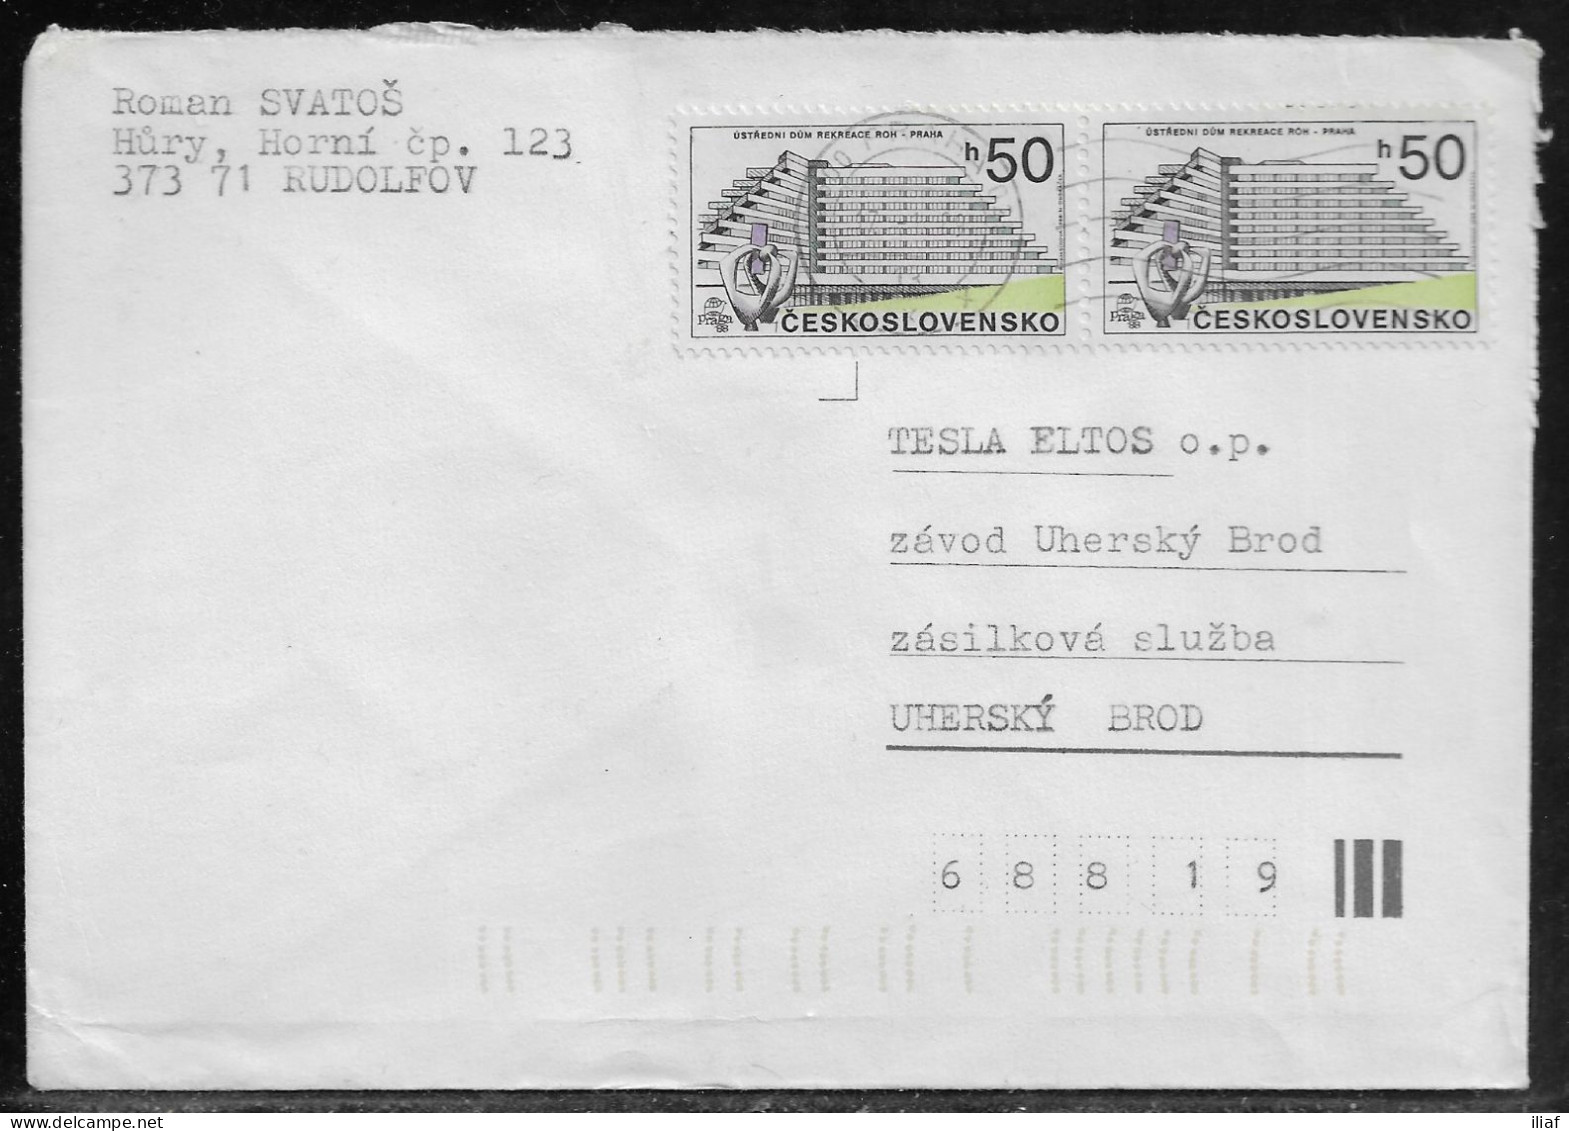 Czechoslovakia. Stamp Sc. 2710 On Letter, Sent From Praha 27.01.89 For “Tesla” Uhersky Brod. - Covers & Documents